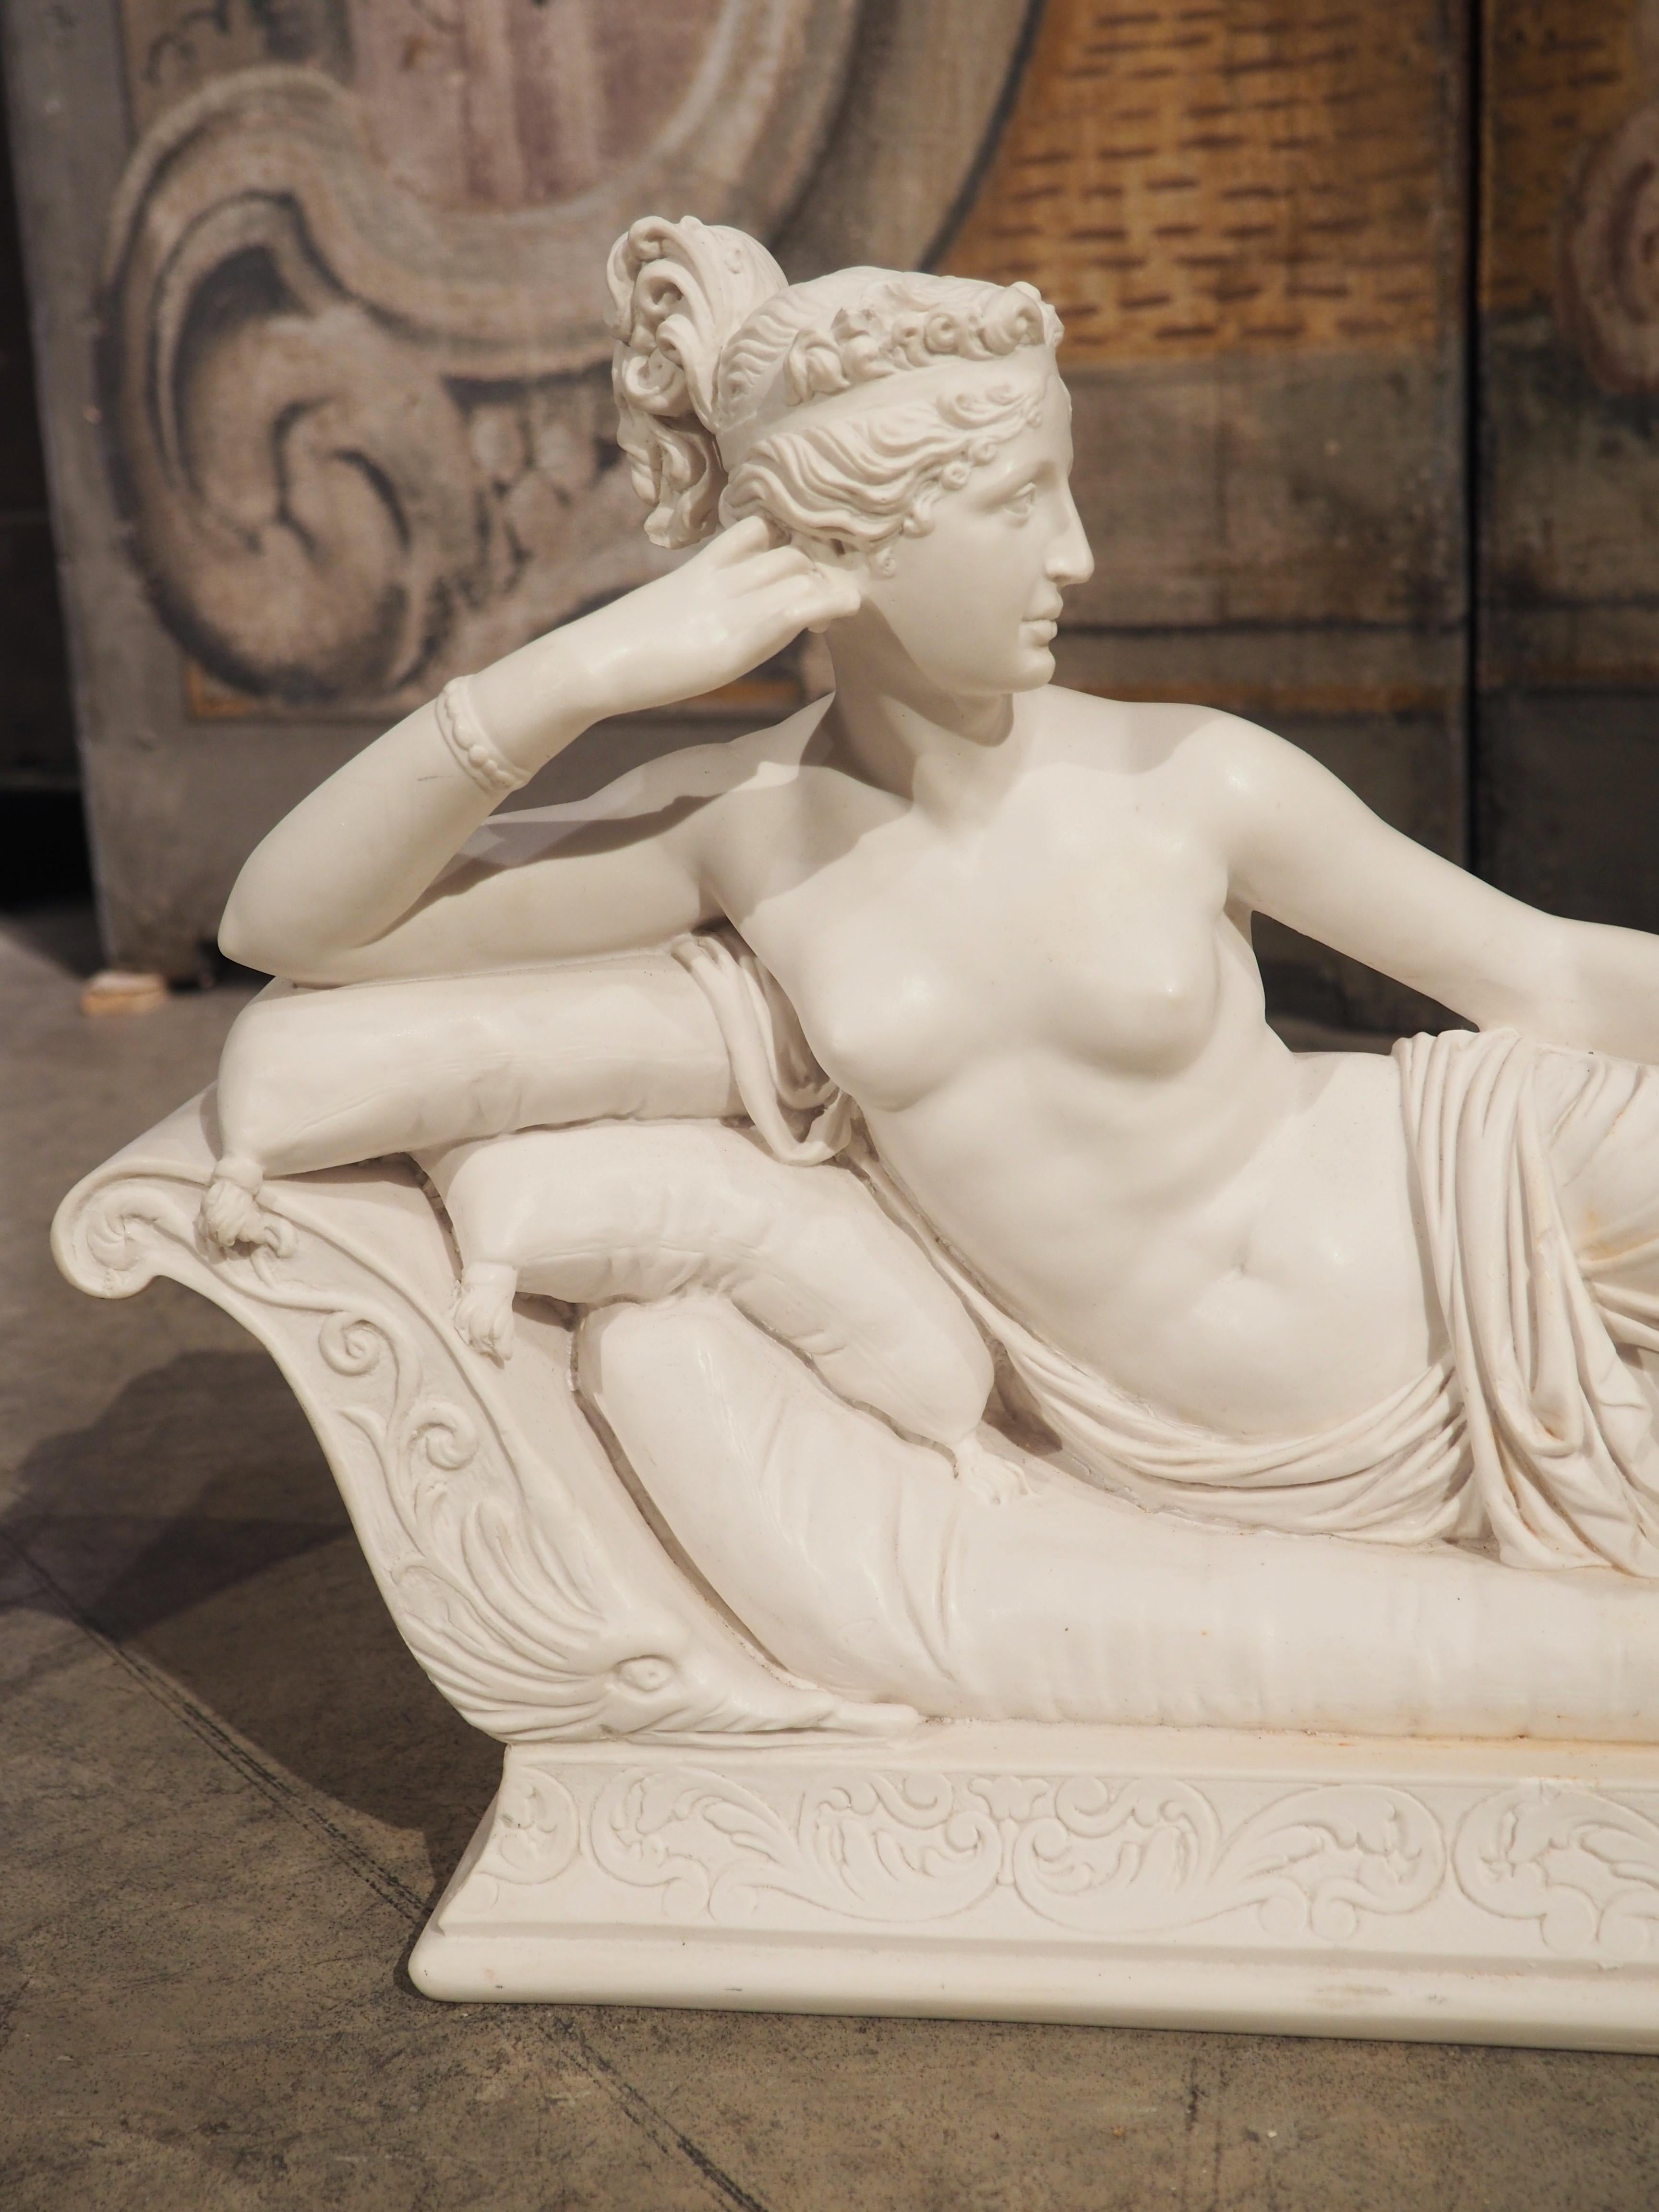 After the early 19th century original life-size white marble sculpture by Antonio Canova, this Neoclassical style marble sculpture is by Amilcare Santini (signed on the back side). The famous sculpture portrays a semi-nude Pauline Bonaparte (younger